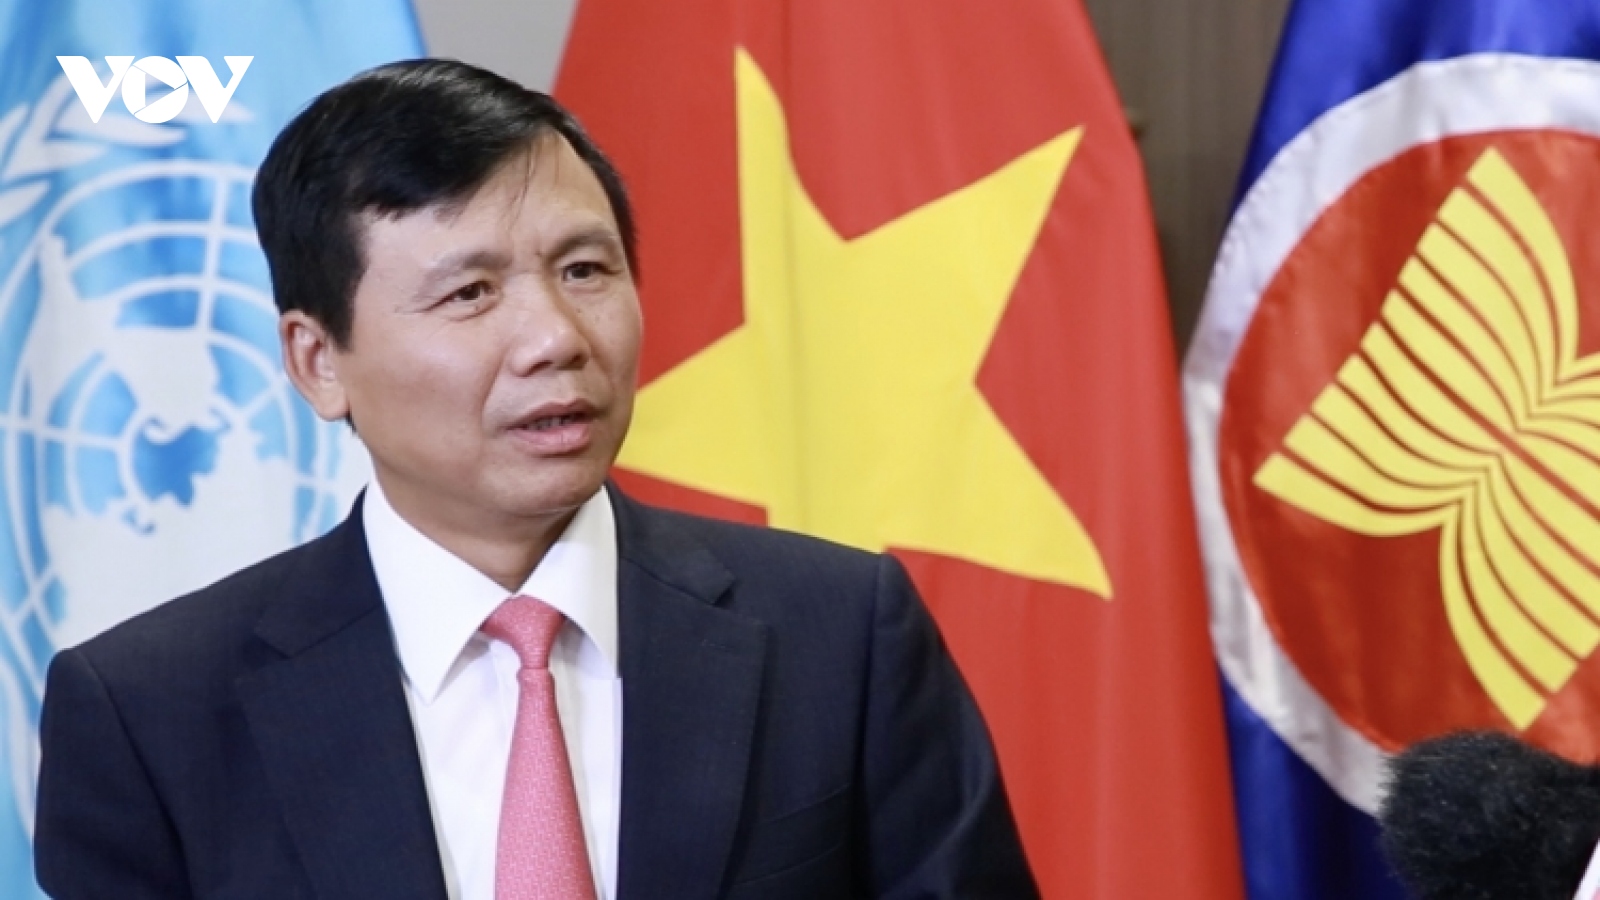 Vietnam shows concern about use of force in international relations